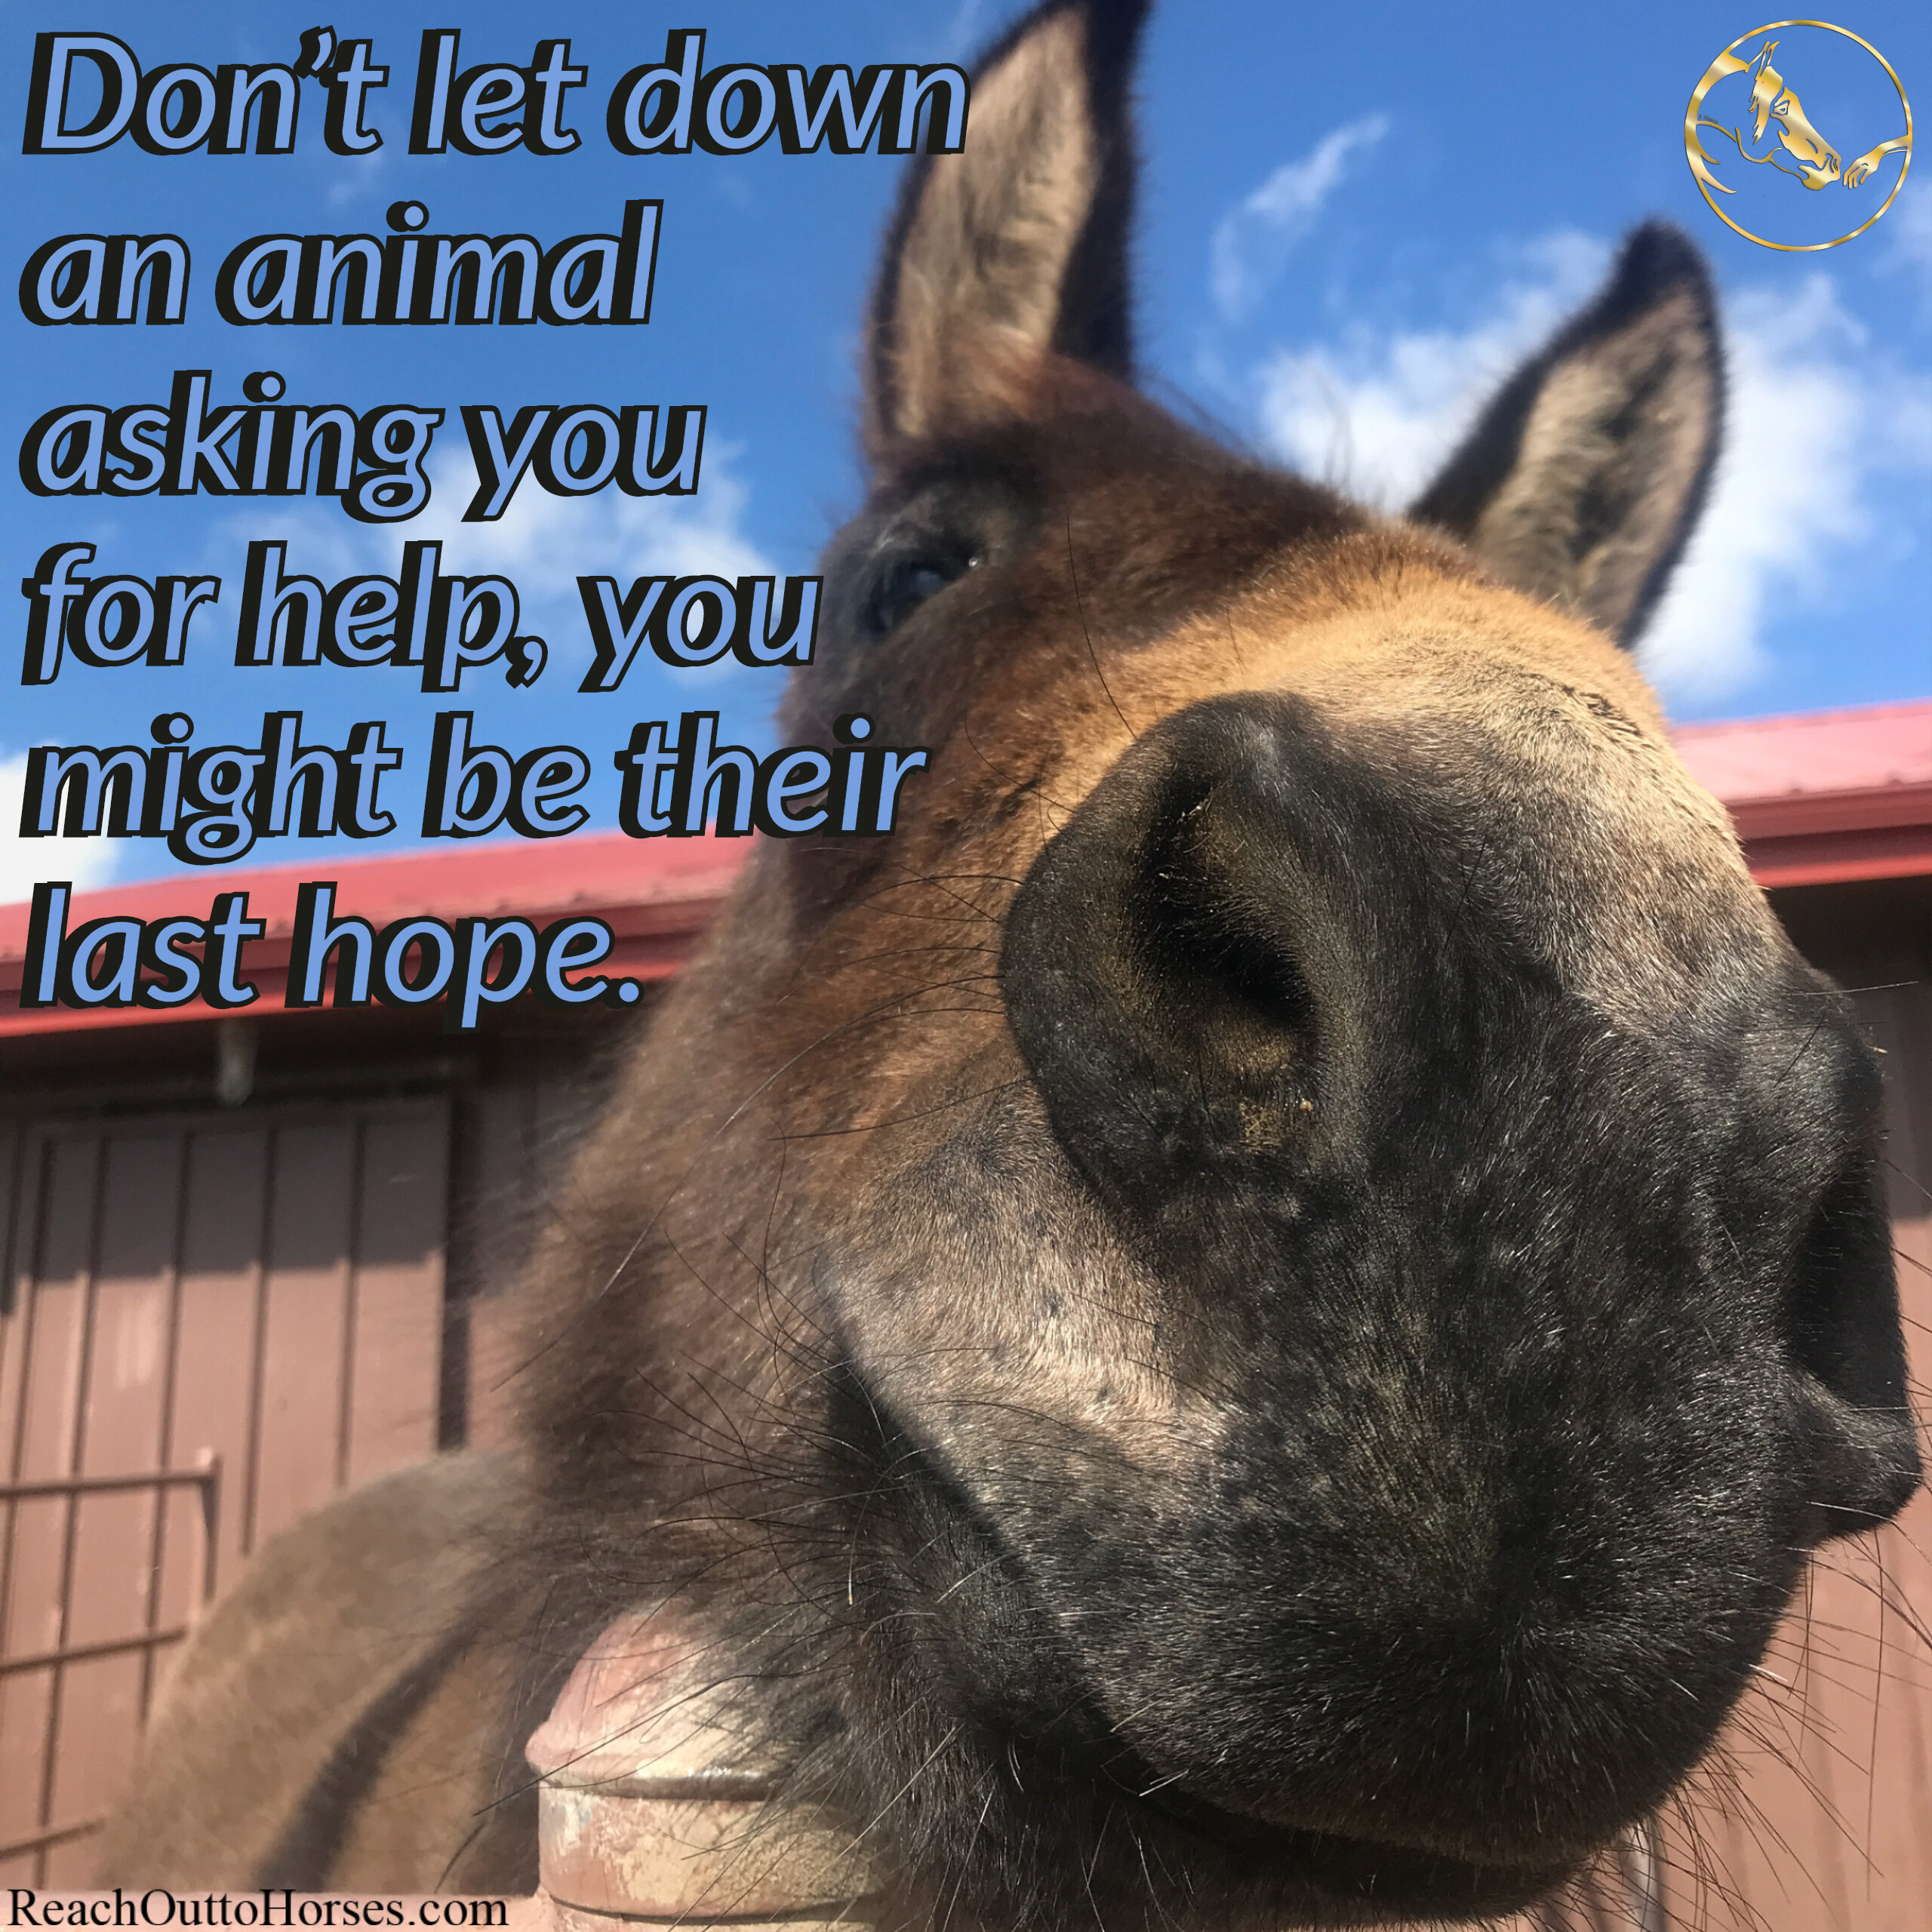 Don't Let Down an Animal Asking You for Help, You Might Be Their Last Hope